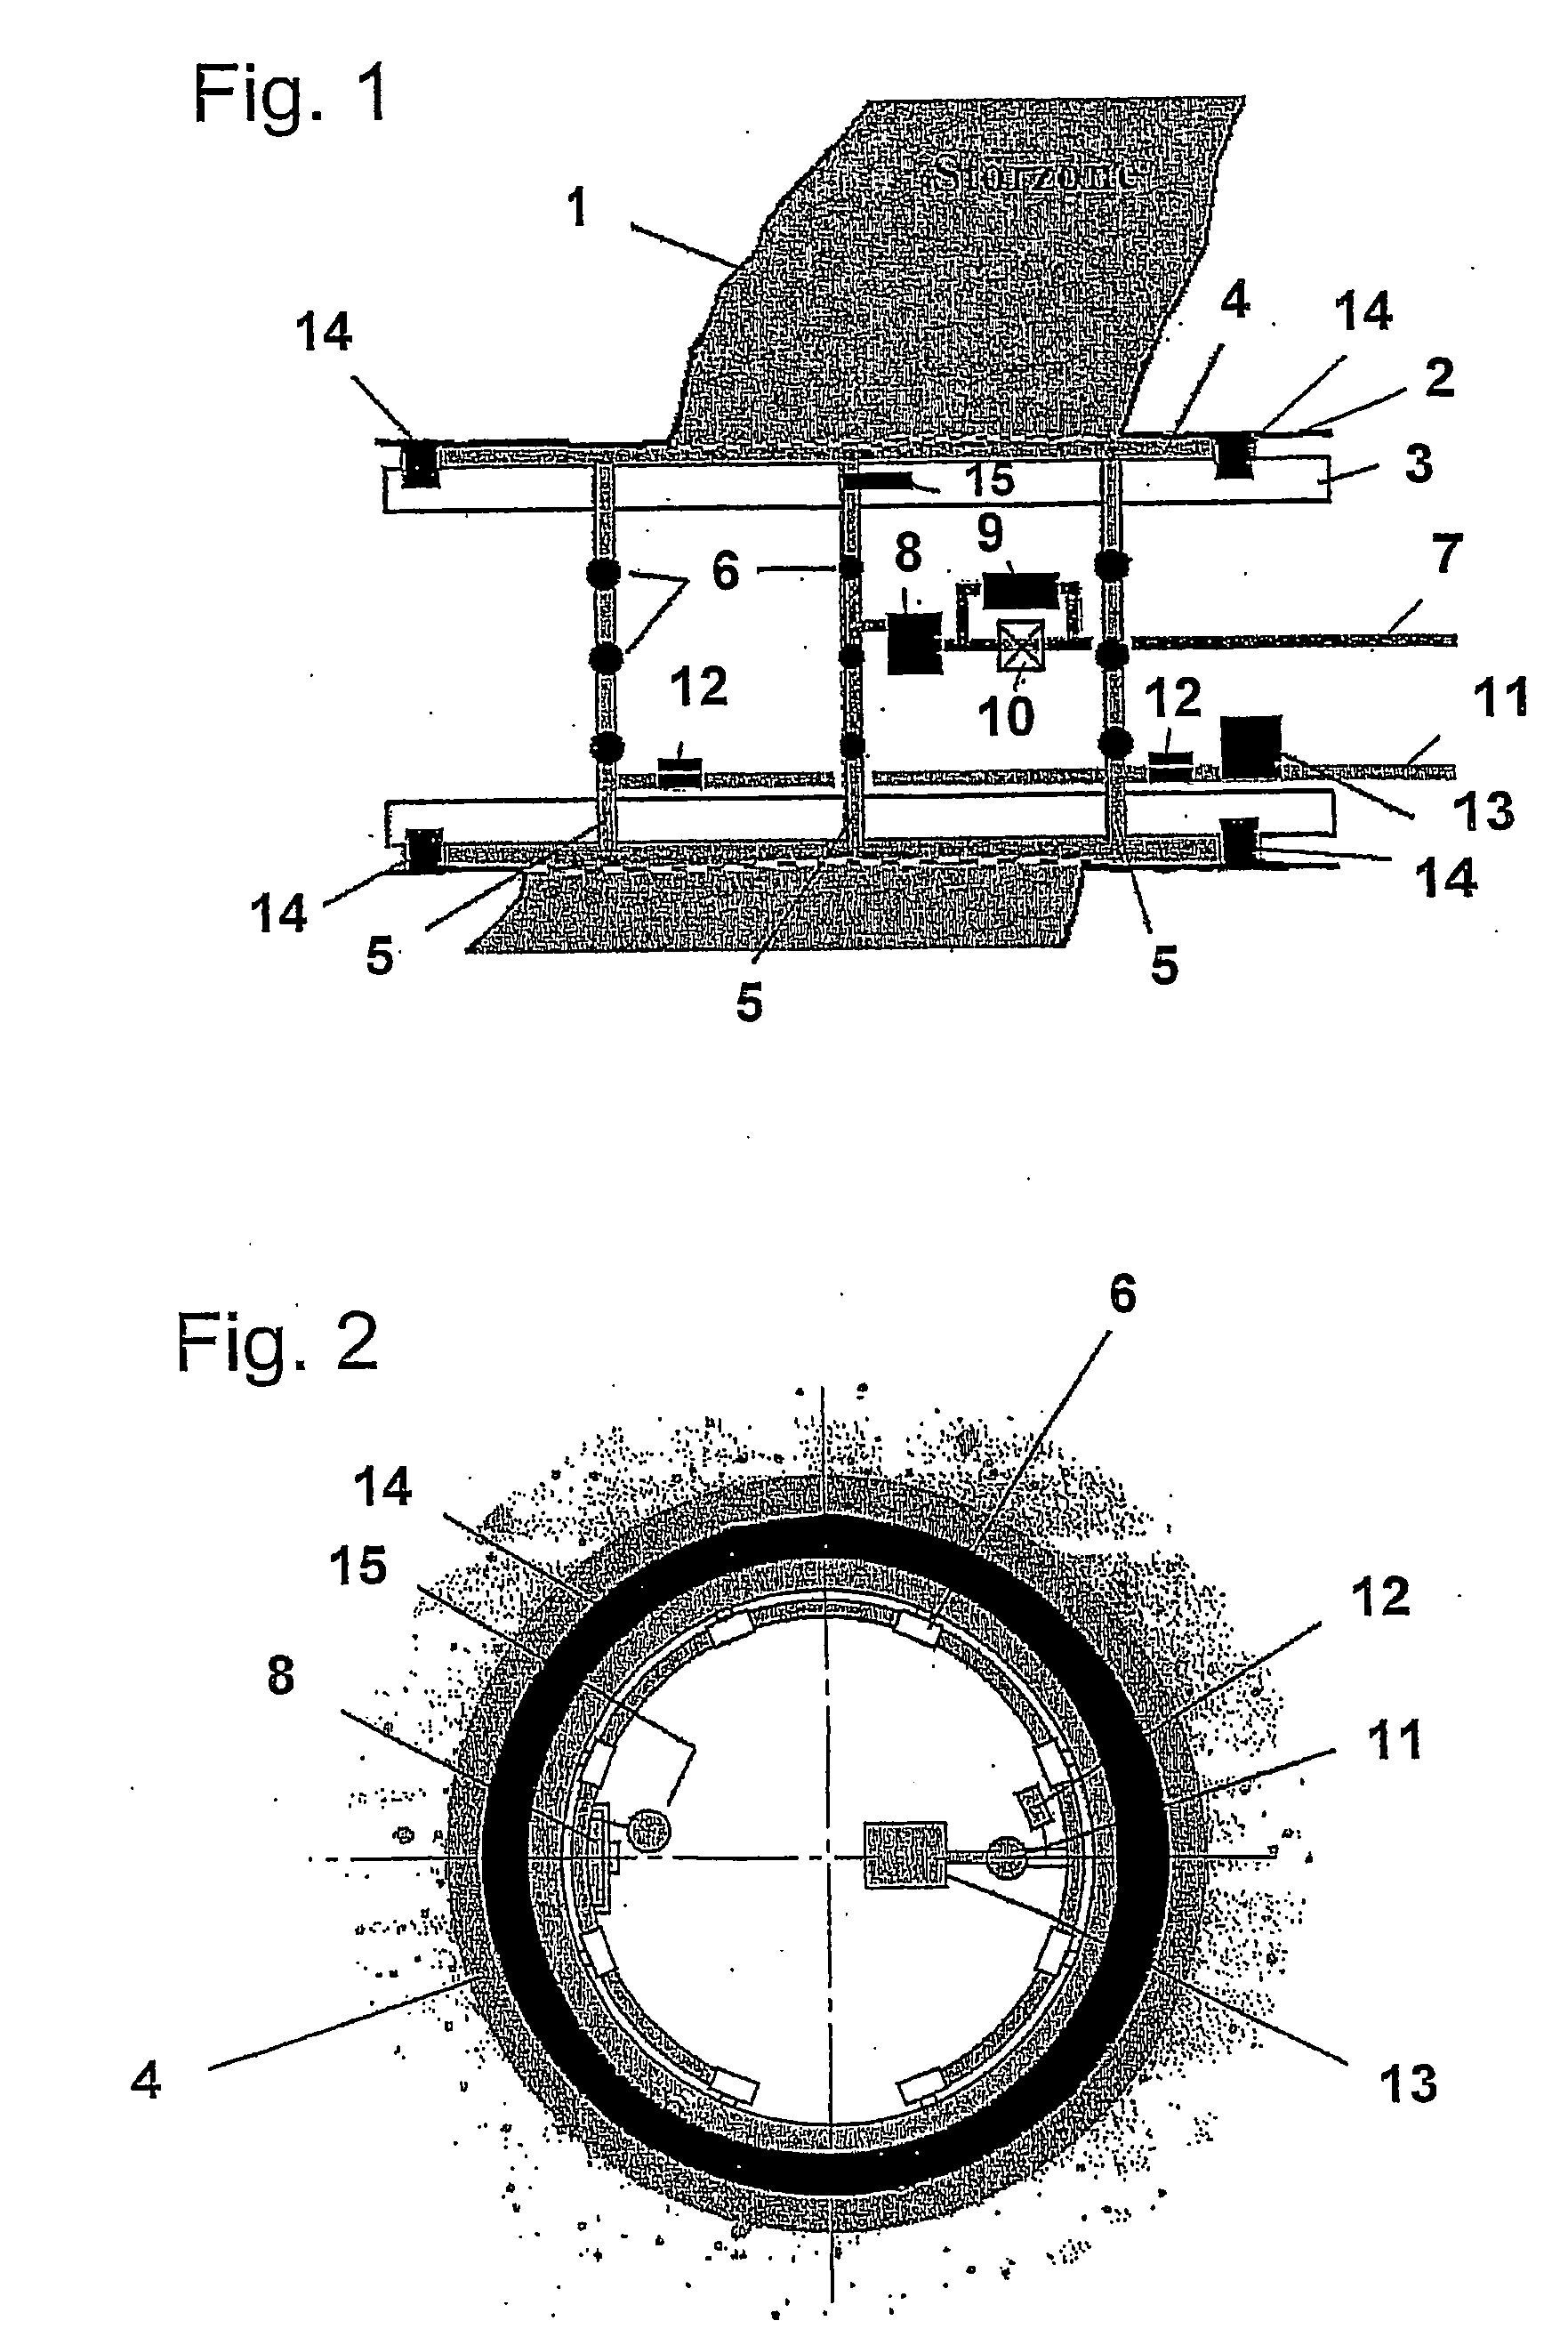 Method and Device for Trenchless Laying of Pipelines